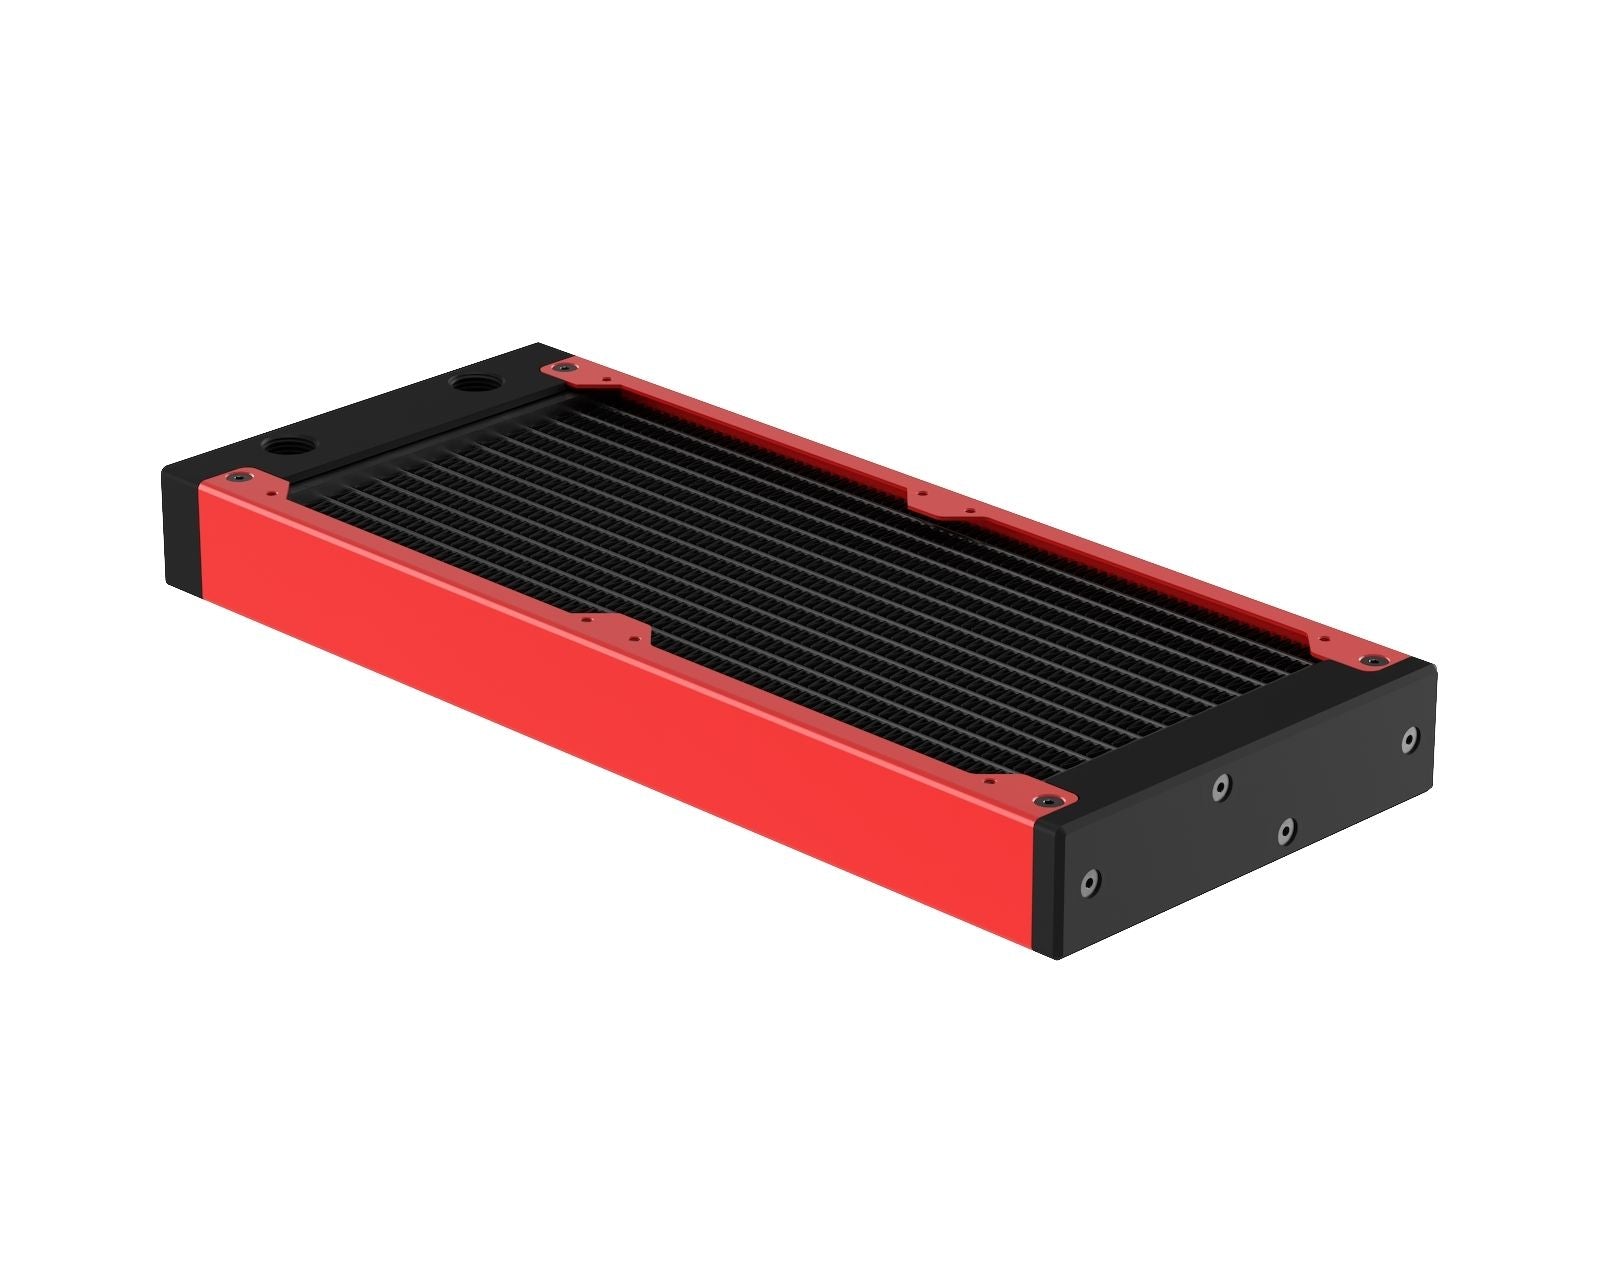 PrimoChill 240SL (30mm) EXIMO Modular Radiator, Black POM, 2x120mm, Dual Fan (R-SL-BK24) Available in 20+ Colors, Assembled in USA and Custom Watercooling Loop Ready - Razor Red